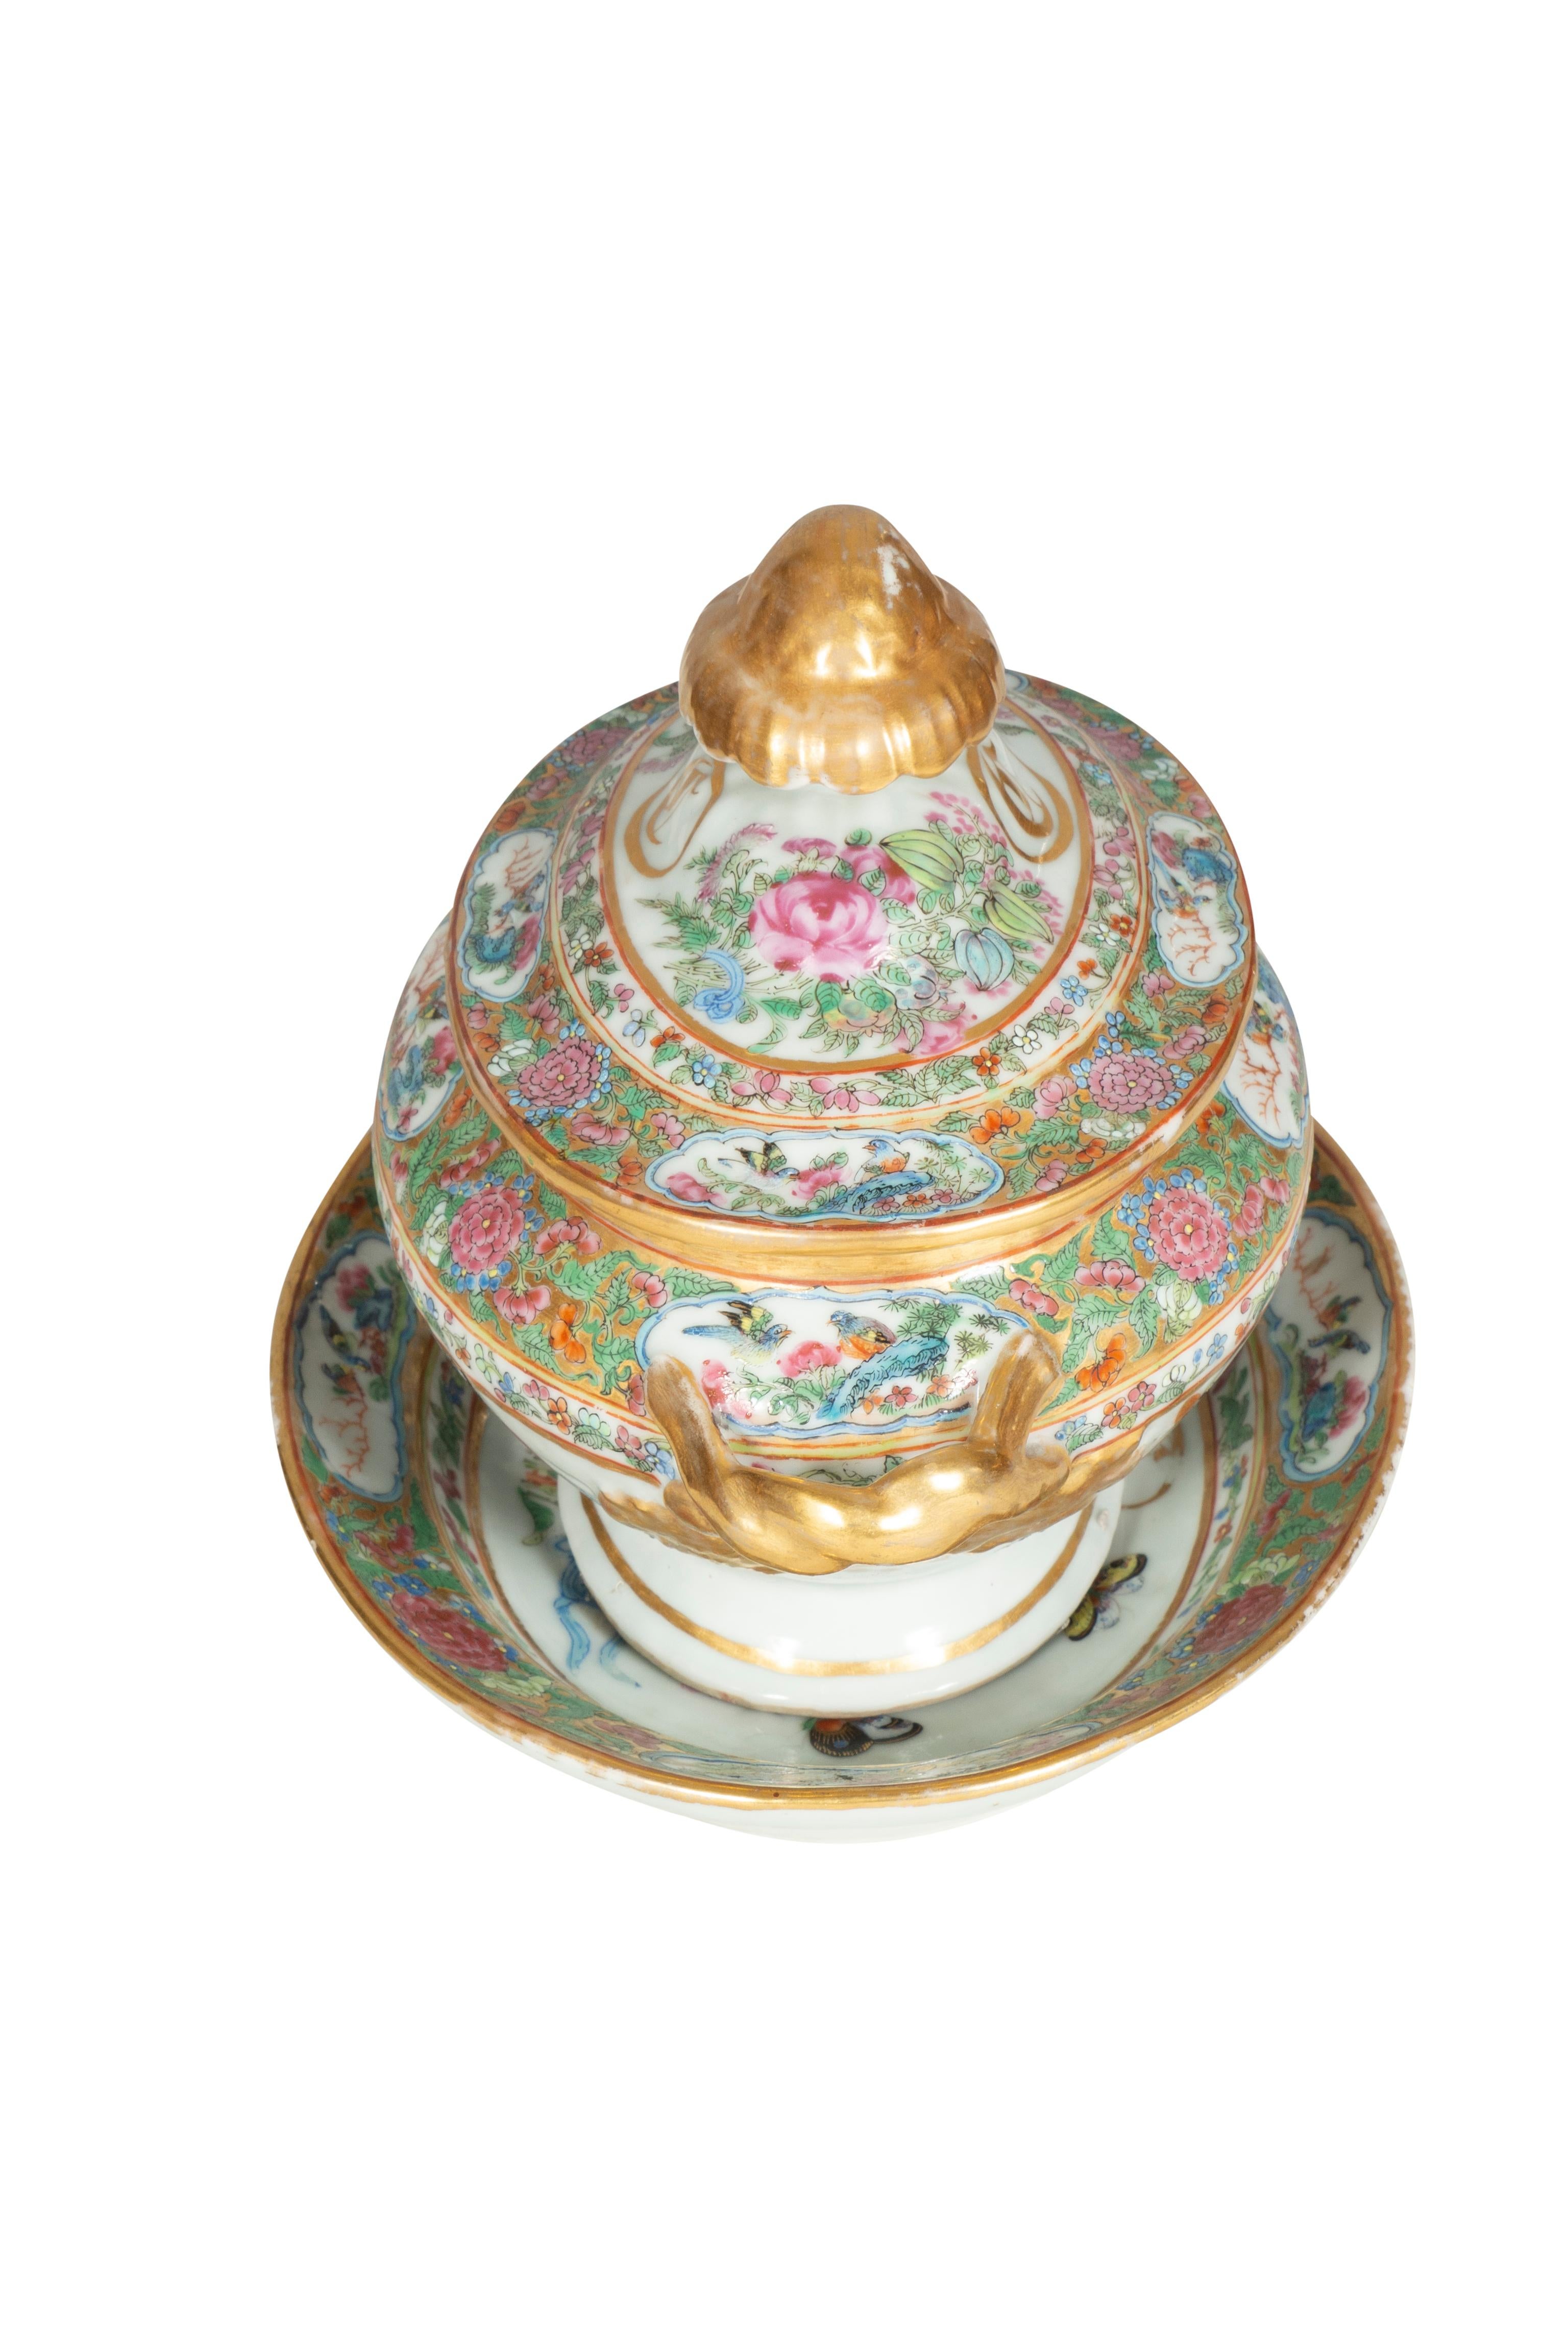 Chinese Export Famille Rose Porcelain Sauce Tureen And Underplate For Sale 1